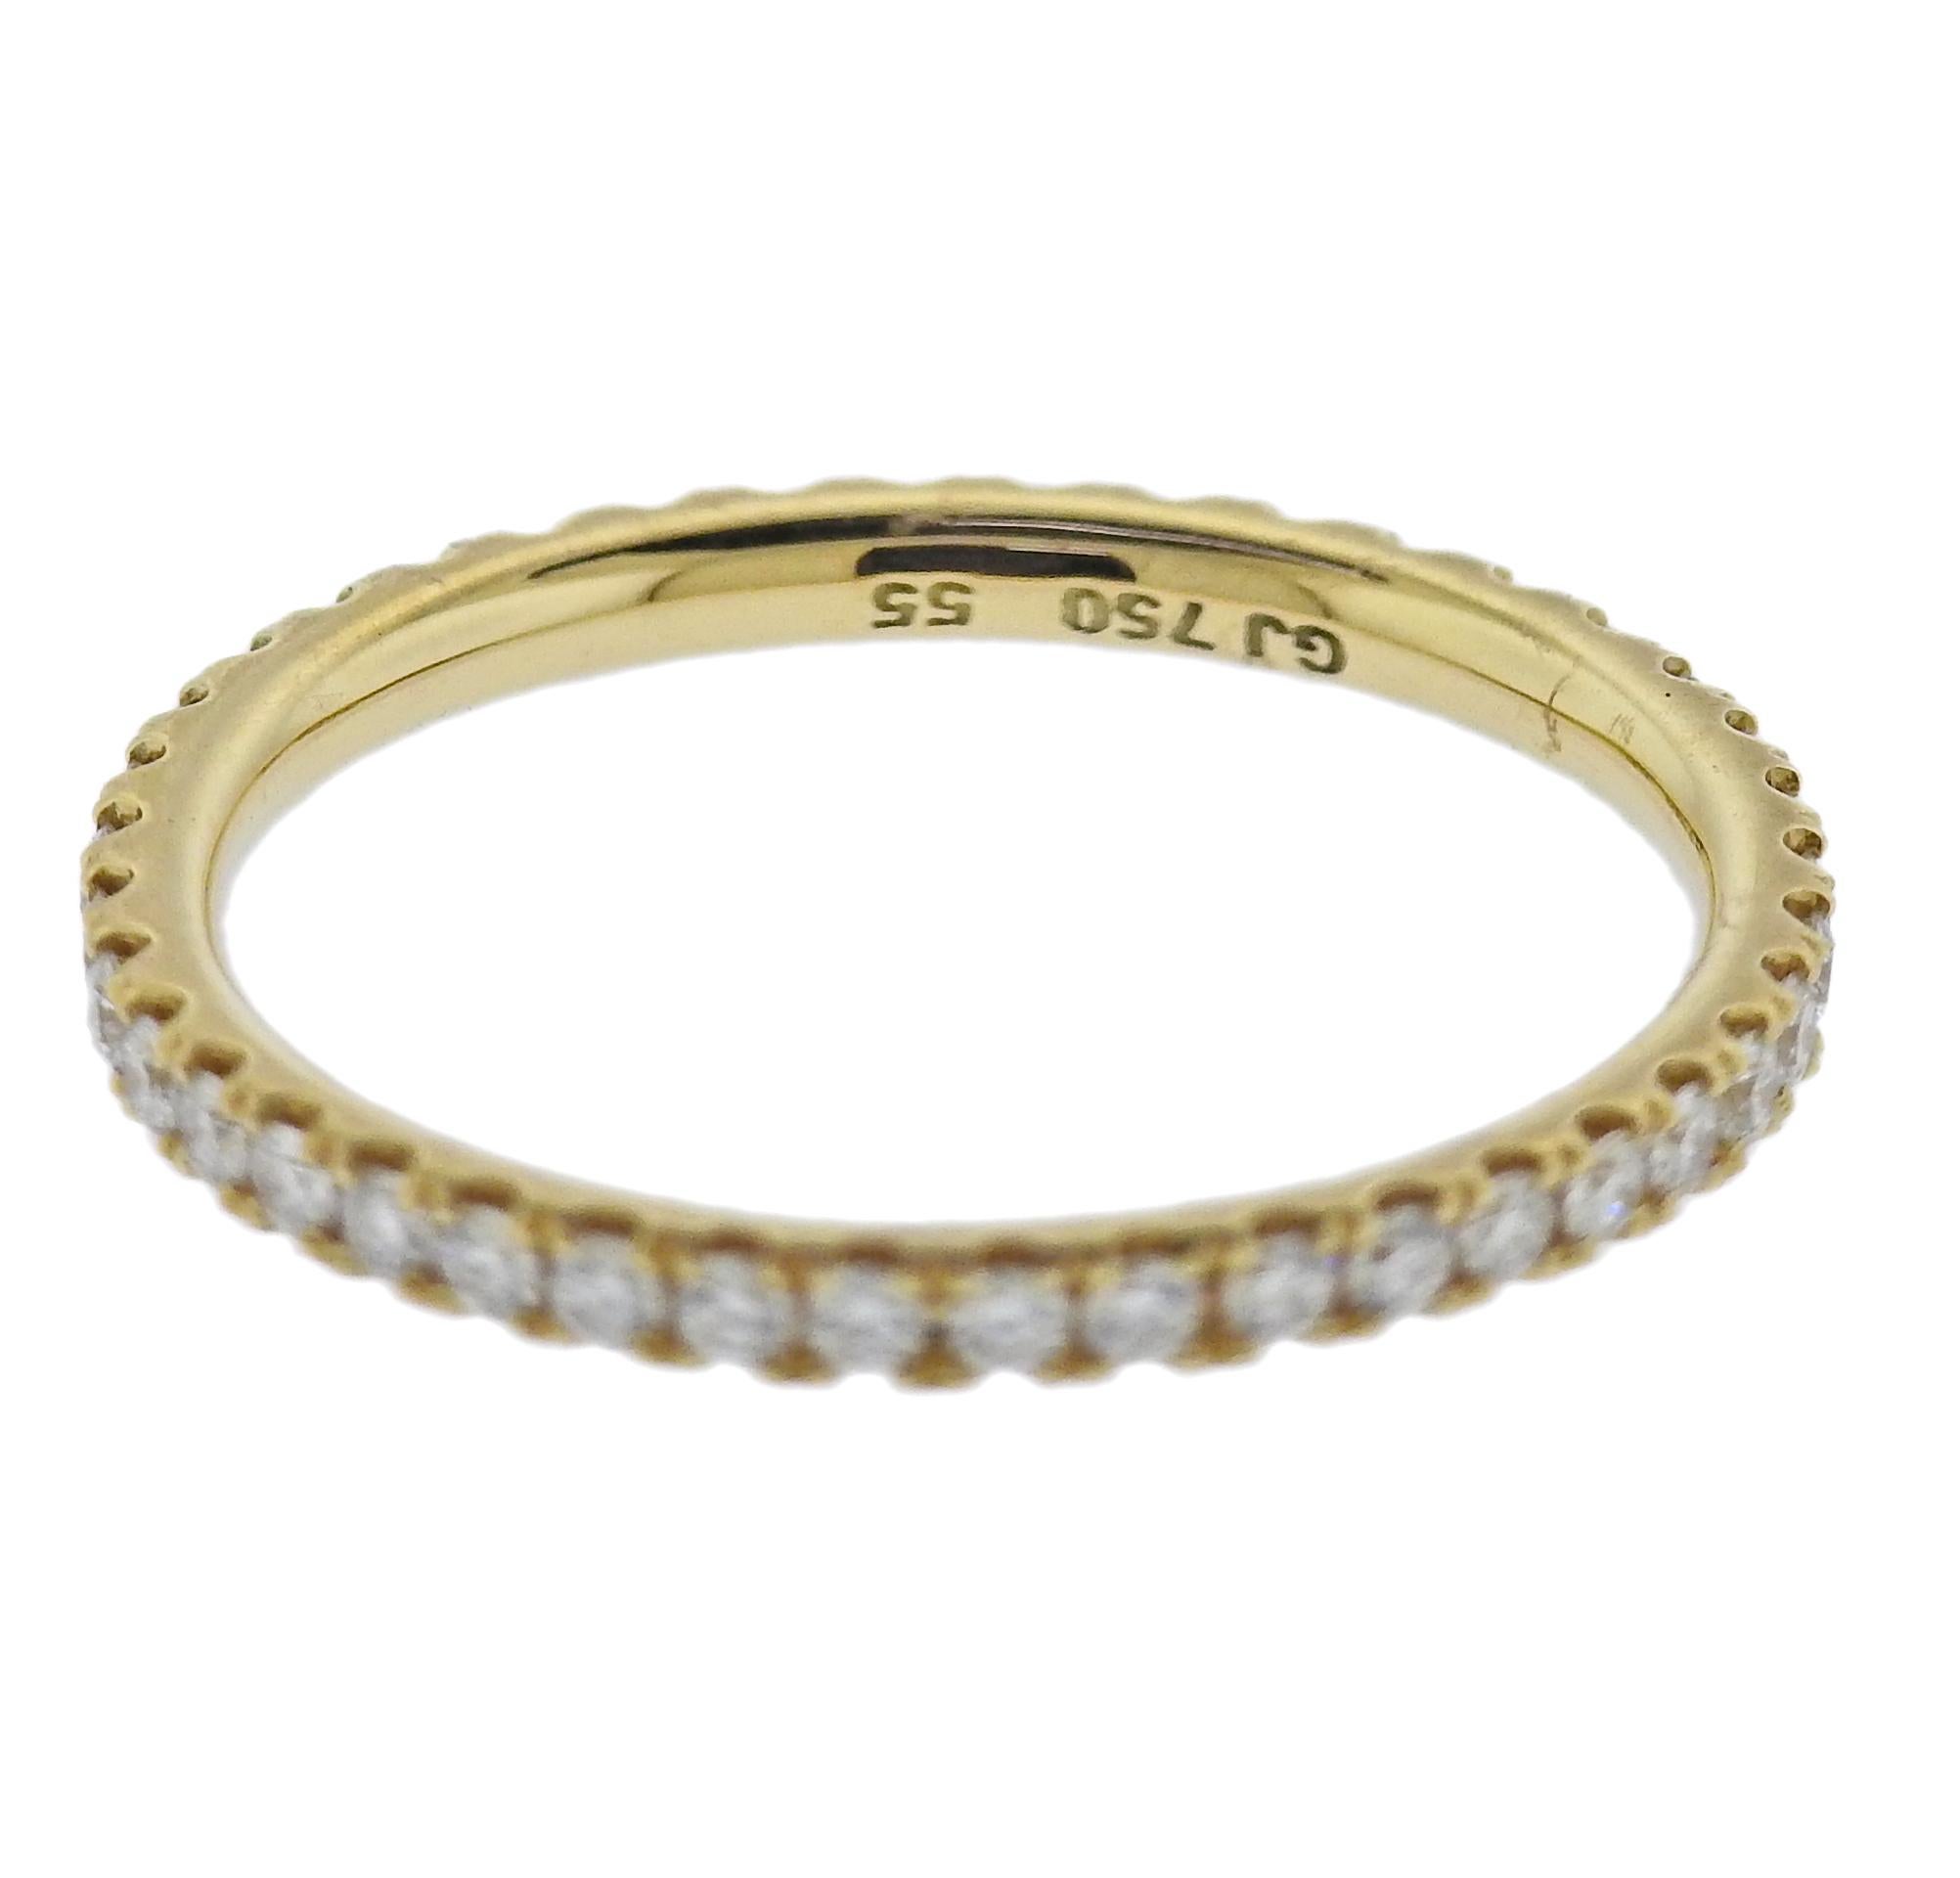 Brand new 18k yellow gold band ring by Georg Jensen, with approx. 0.49ctw G/VS diamonds. Model # 3572700. Ring is 2mm wide, Available in sizes: 51,52,53,54,55. Marked: GJ, 750, Ring size. Weight 2 grams. 